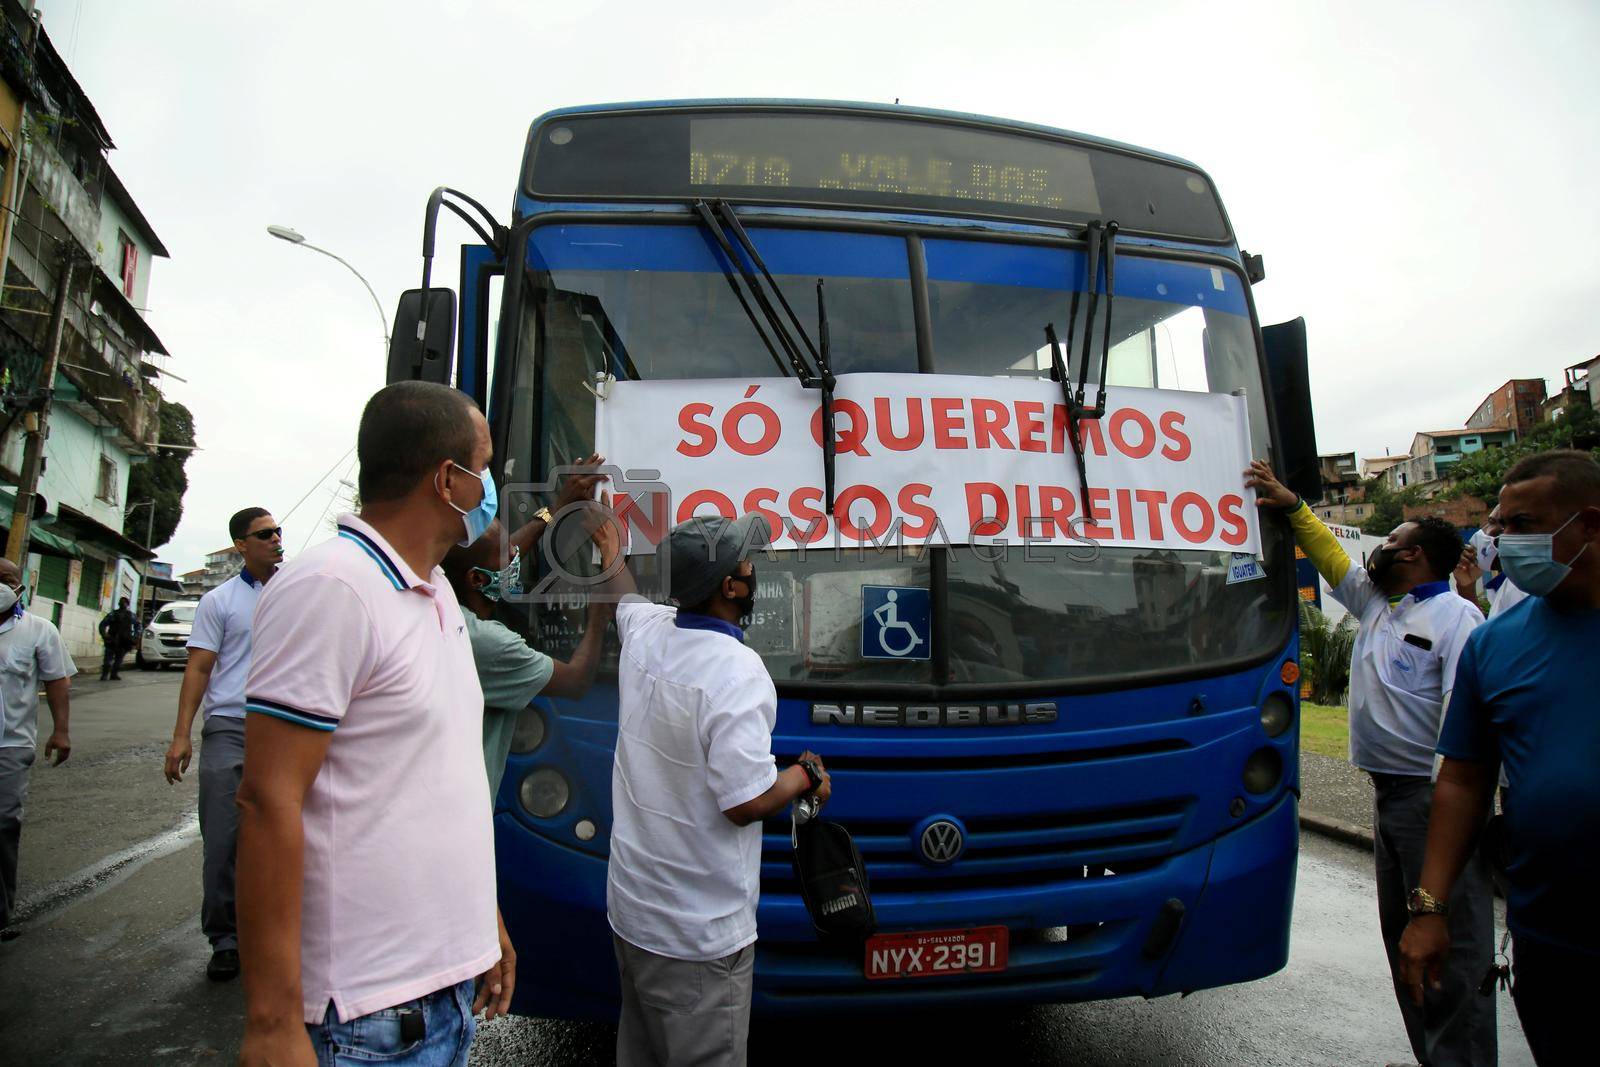 salvador, bahia, brazil - july 27, 2021: Public transport drivers halt their activities in protest at Lapa Station in the city of Salvador.